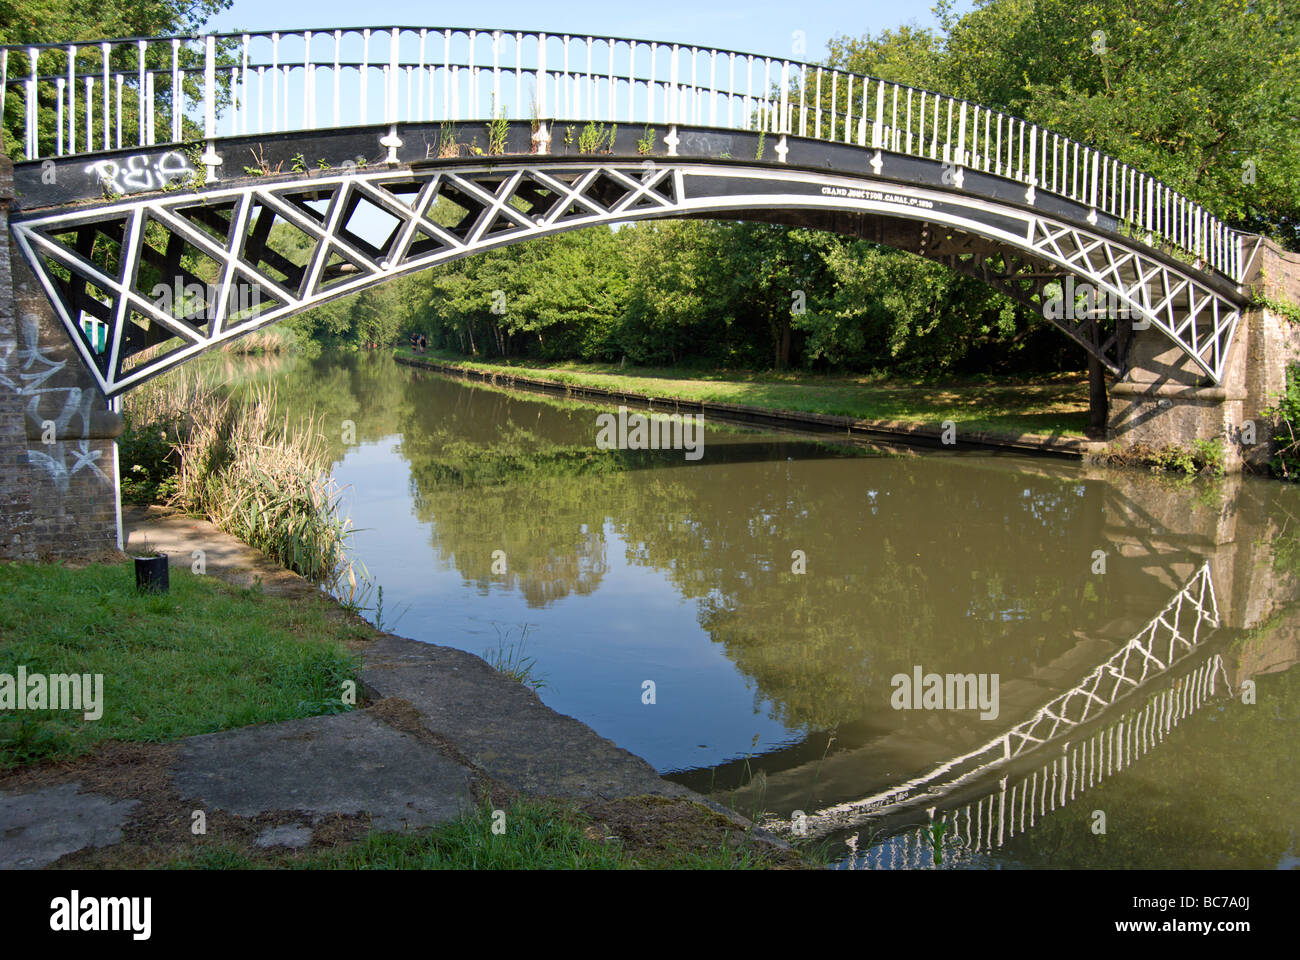 the 1820 gallows bridge crossing the grand union canal, formerly the grand junction canal, in brentford, west london, england Stock Photo